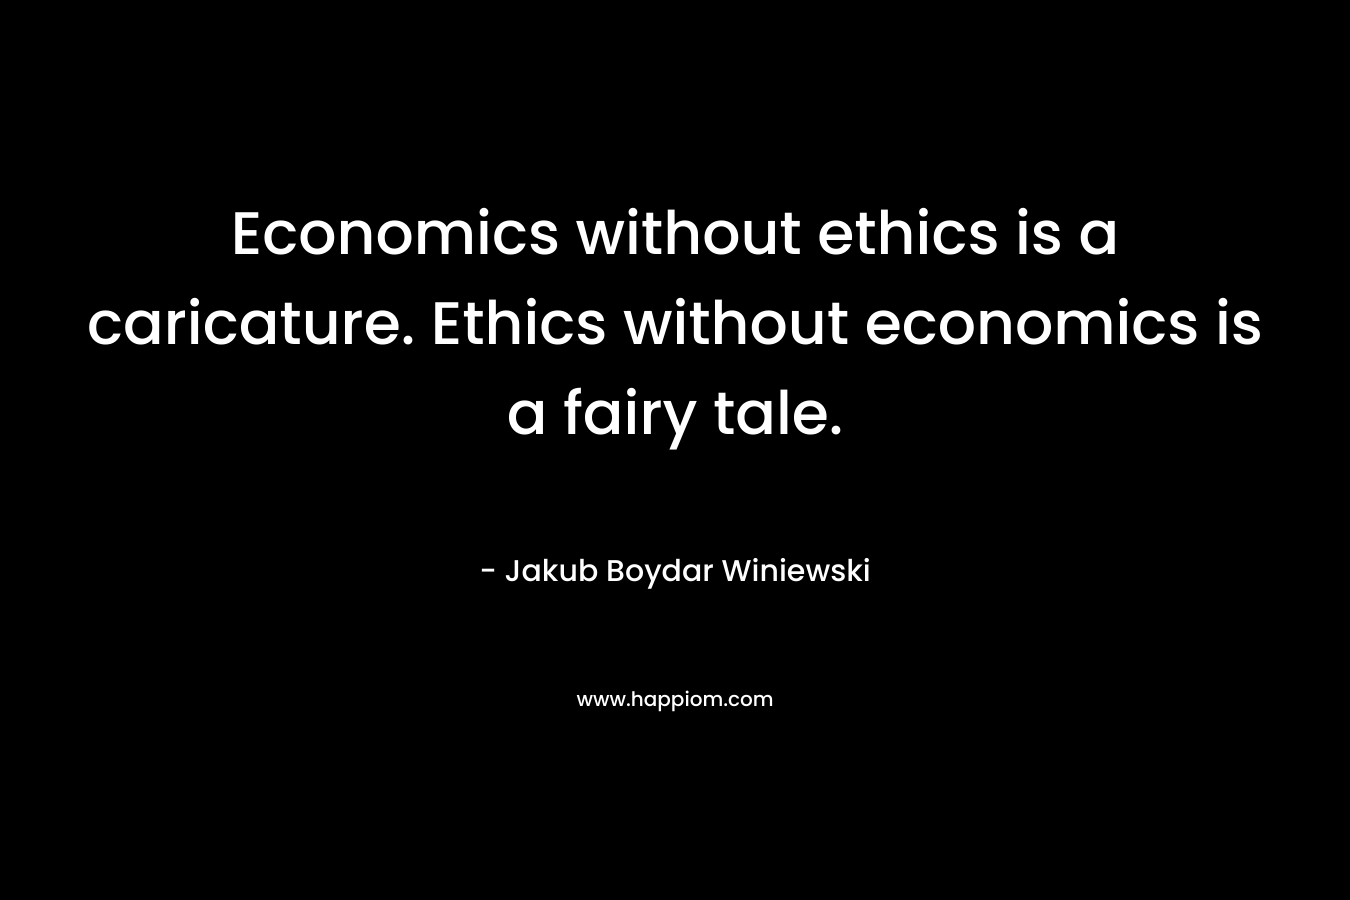 Economics without ethics is a caricature. Ethics without economics is a fairy tale.